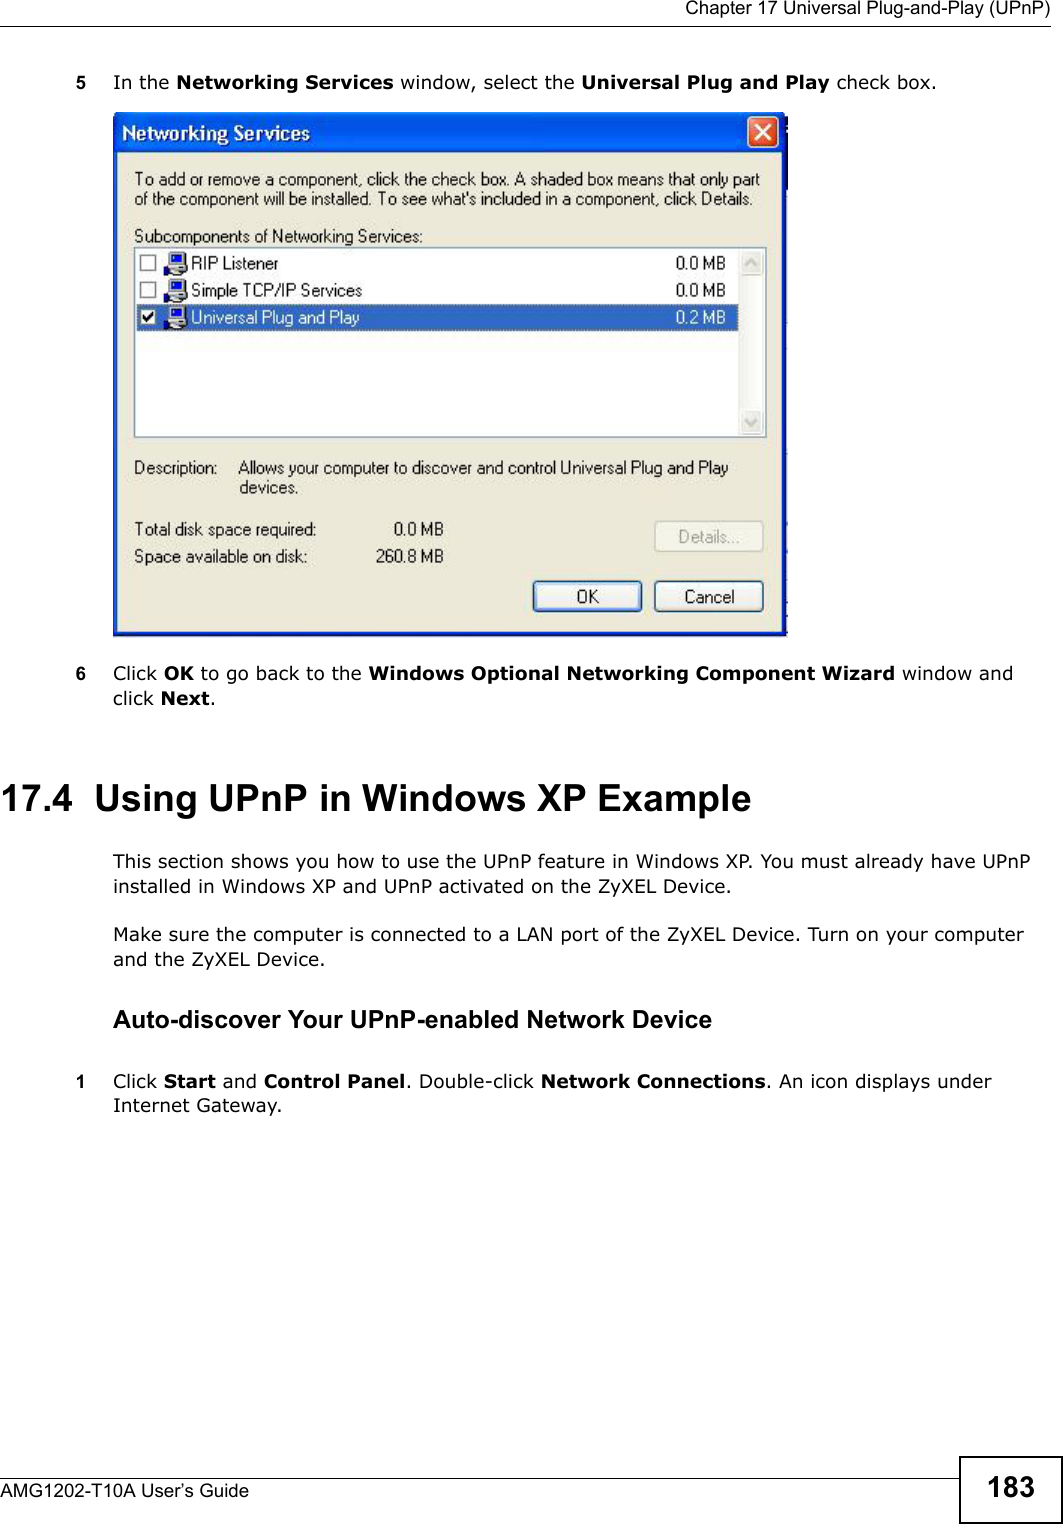  Chapter 17 Universal Plug-and-Play (UPnP)AMG1202-T10A User’s Guide 1835In the Networking Services window, select the Universal Plug and Play check box. Networking Services6Click OK to go back to the Windows Optional Networking Component Wizard window and click Next. 17.4  Using UPnP in Windows XP ExampleThis section shows you how to use the UPnP feature in Windows XP. You must already have UPnP installed in Windows XP and UPnP activated on the ZyXEL Device.Make sure the computer is connected to a LAN port of the ZyXEL Device. Turn on your computer and the ZyXEL Device. Auto-discover Your UPnP-enabled Network Device1Click Start and Control Panel. Double-click Network Connections. An icon displays under Internet Gateway.